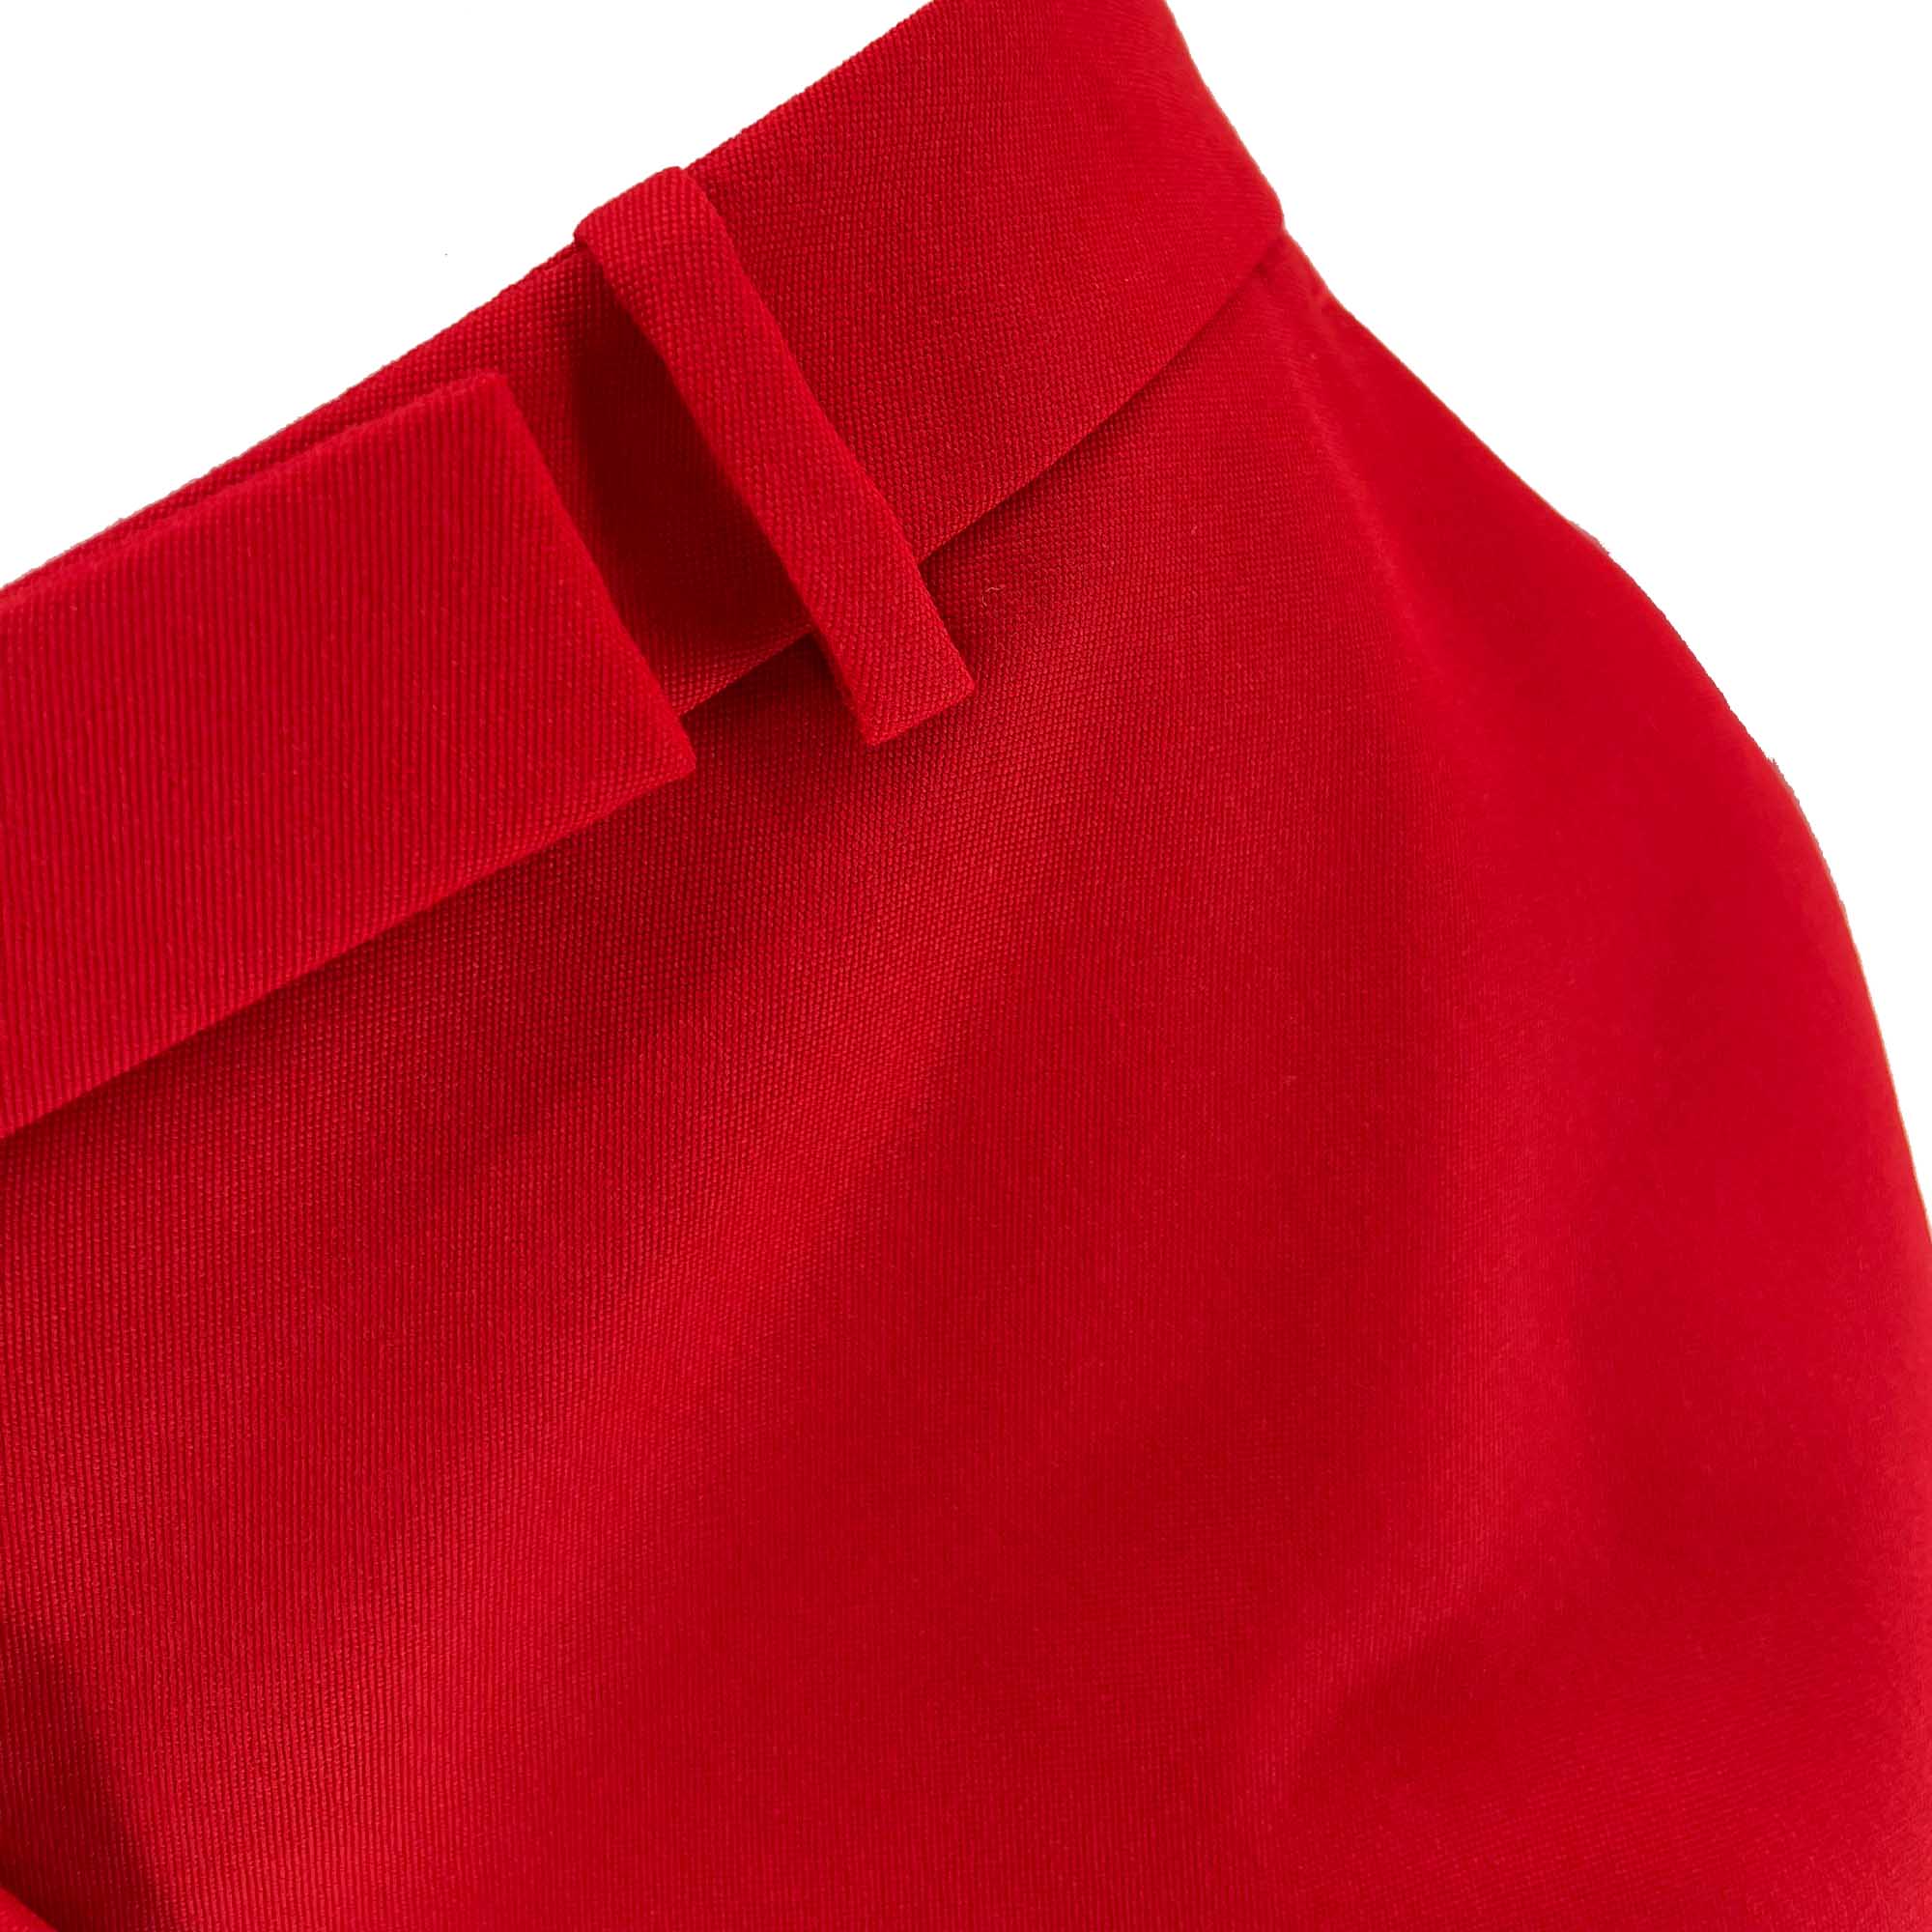 Alexander McQueen Red Flared Trousers